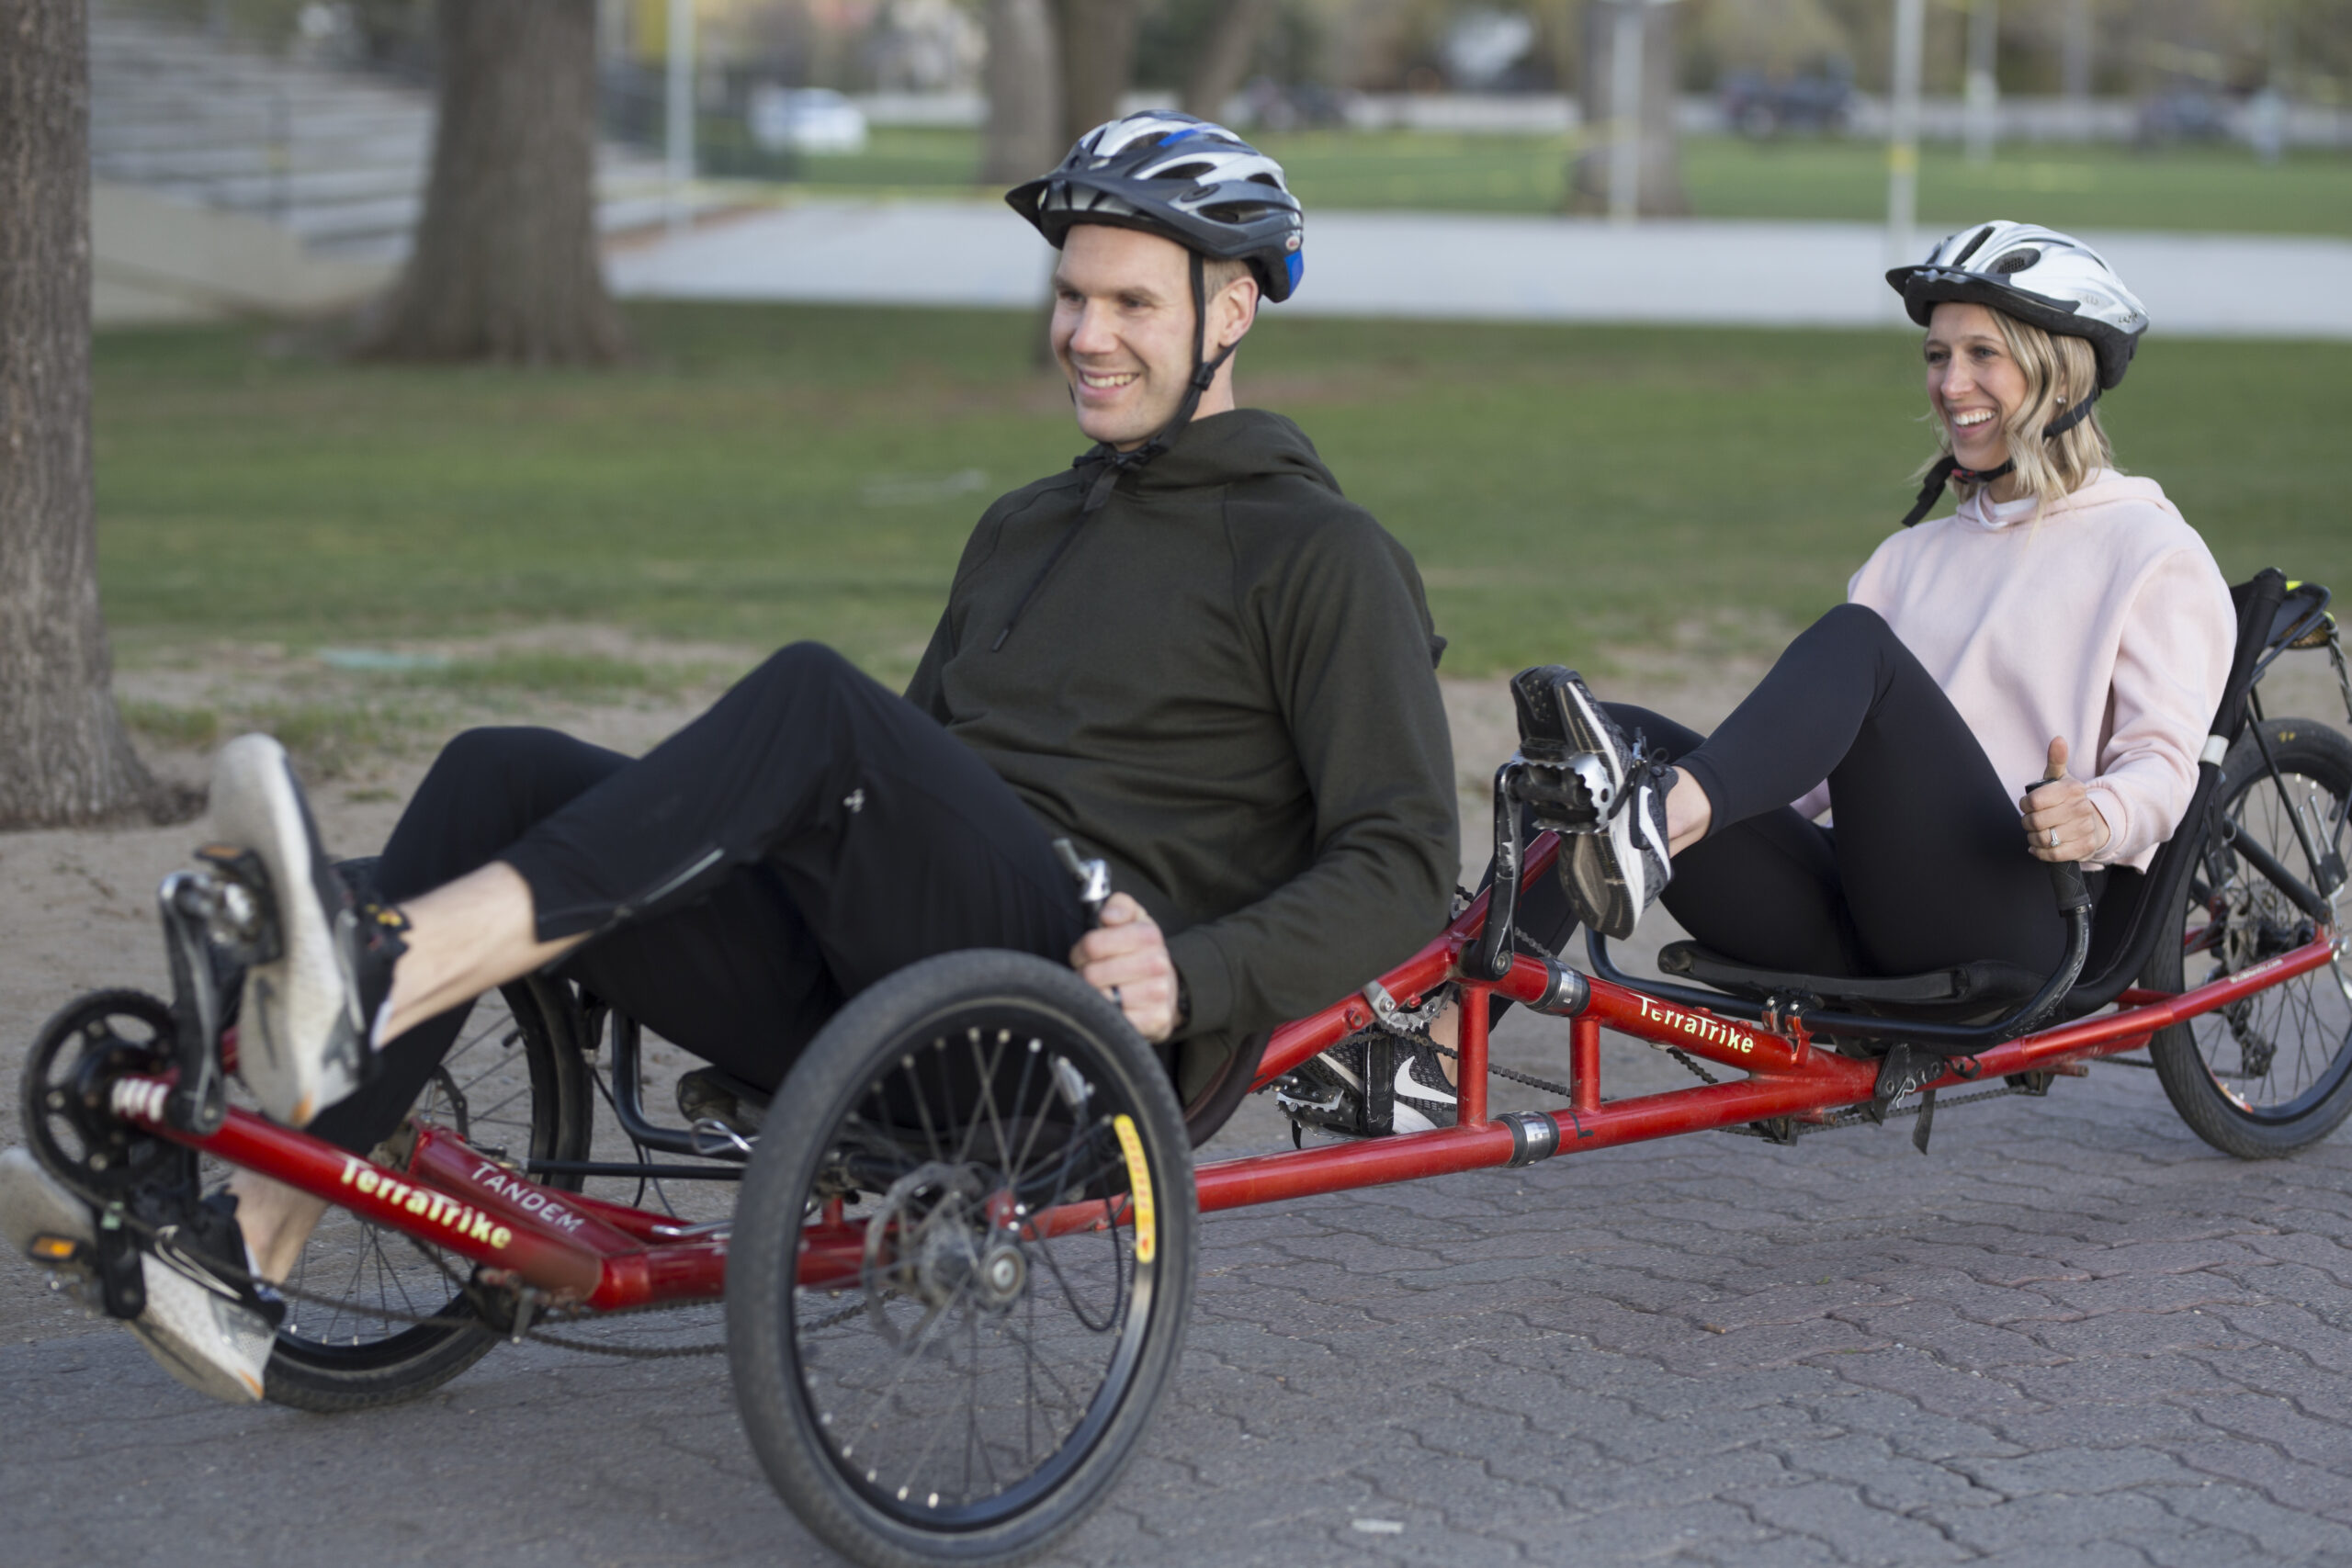 A man (in front) and a woman (behind) riding a red tandem recumbent cycle